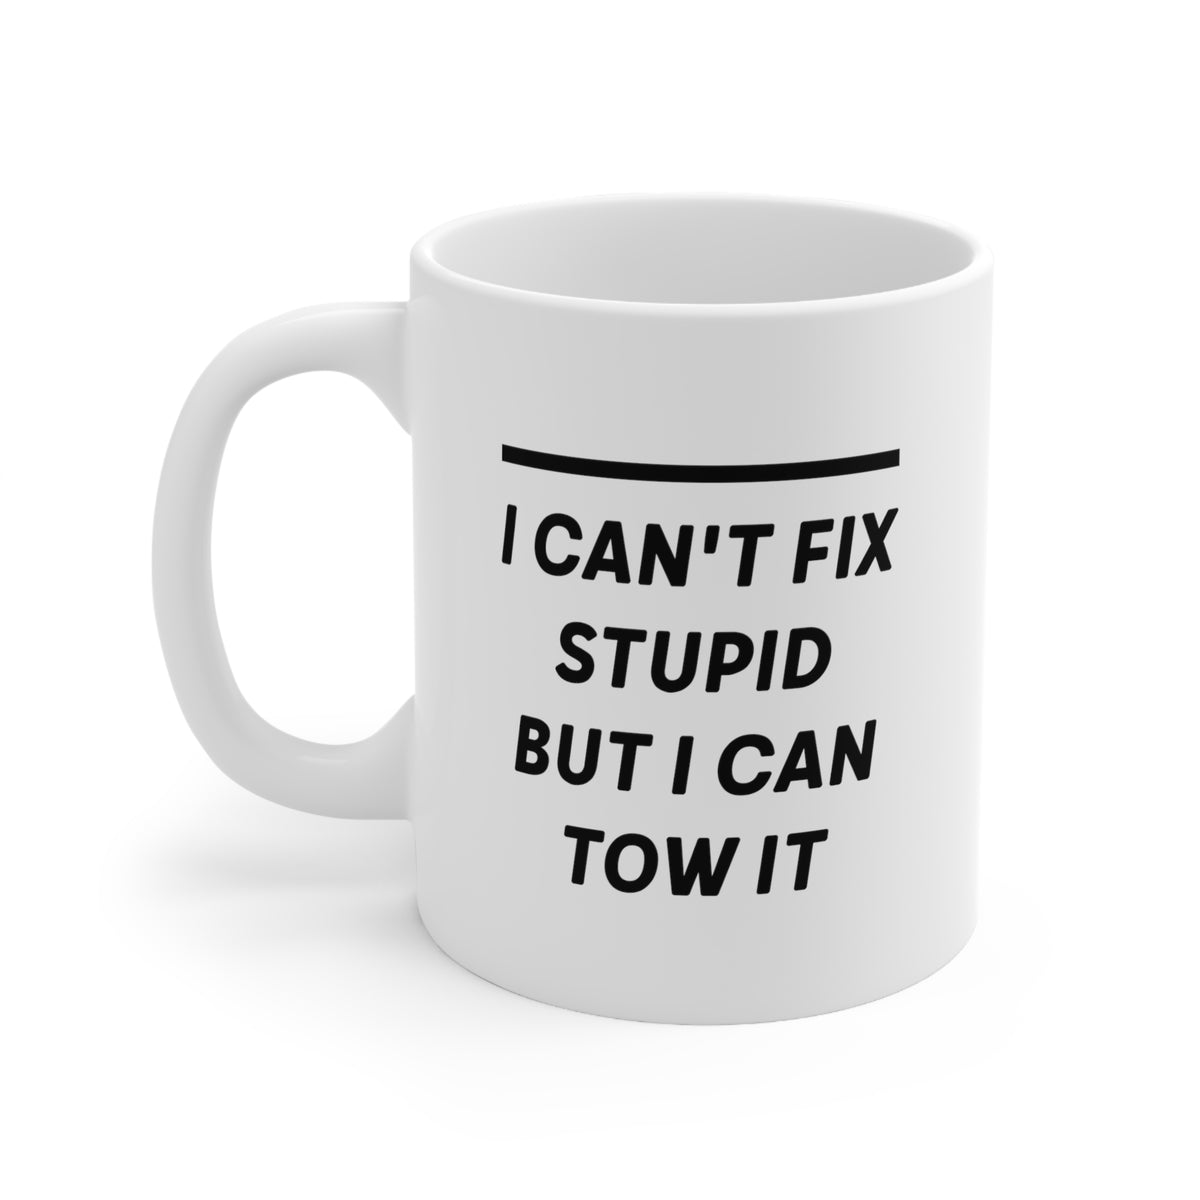 Trucker Coffee Mug - I Can't Fix Stupid But I Can Tow It - Sarcasm Truck Driver Gift For Him